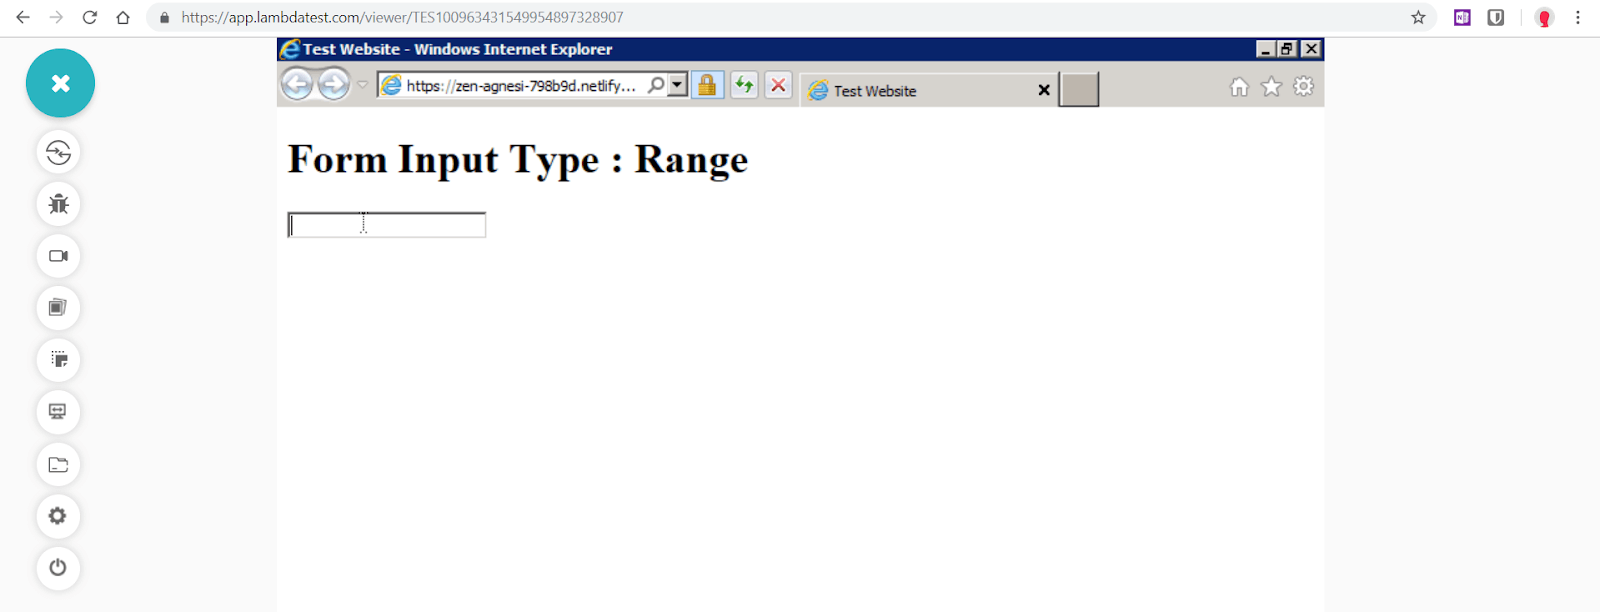  “Range” is not supported in Internet Explorer 9